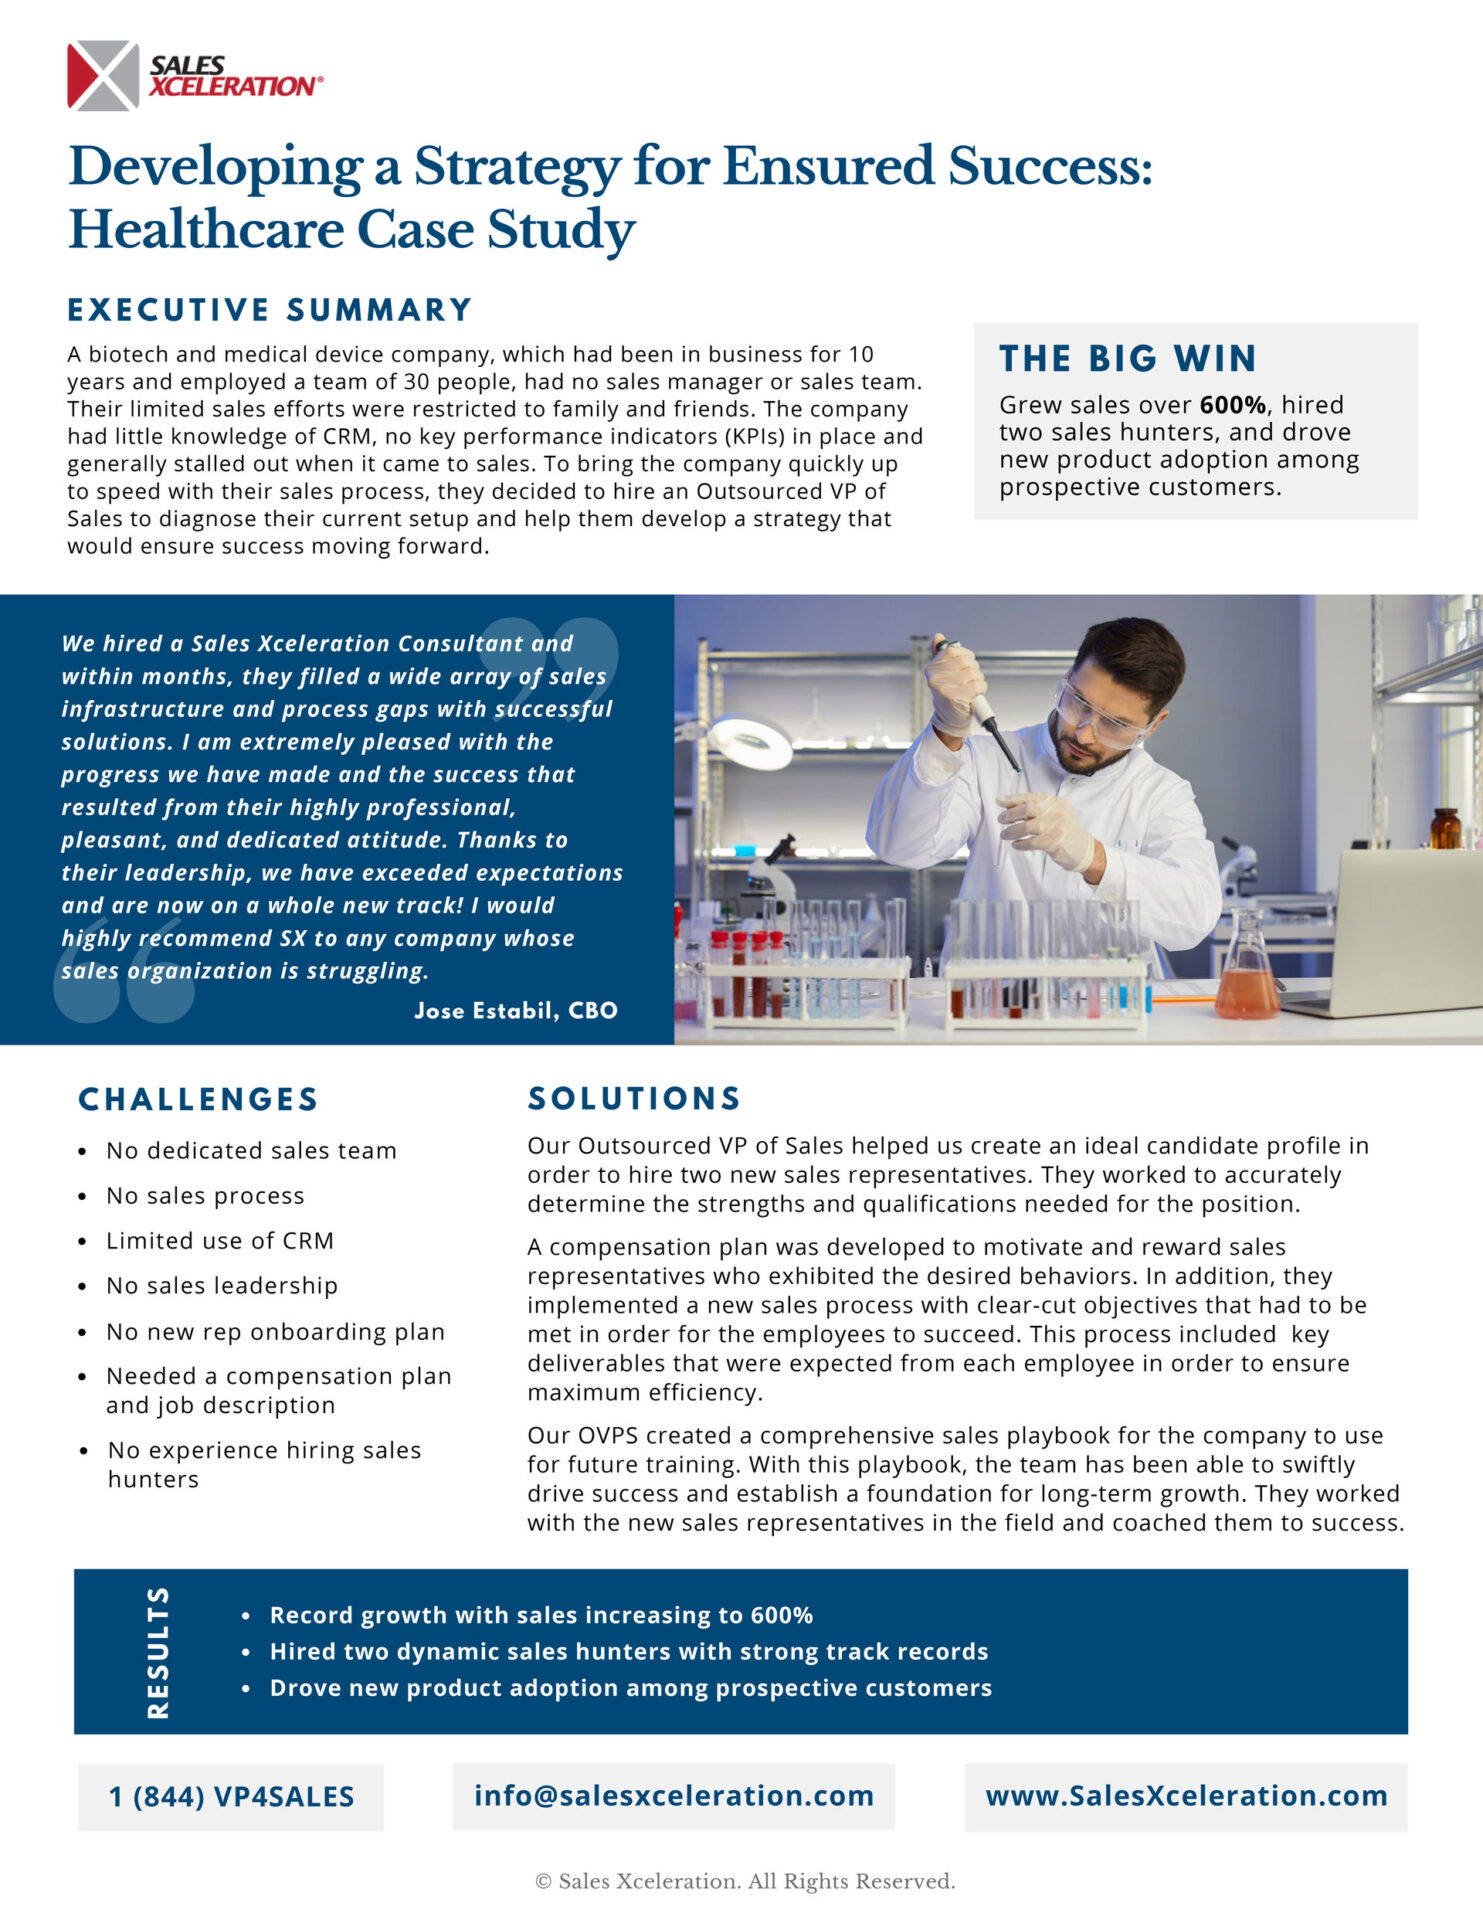 Developing a Strategy for Ensured Success: Healthcare Case Study